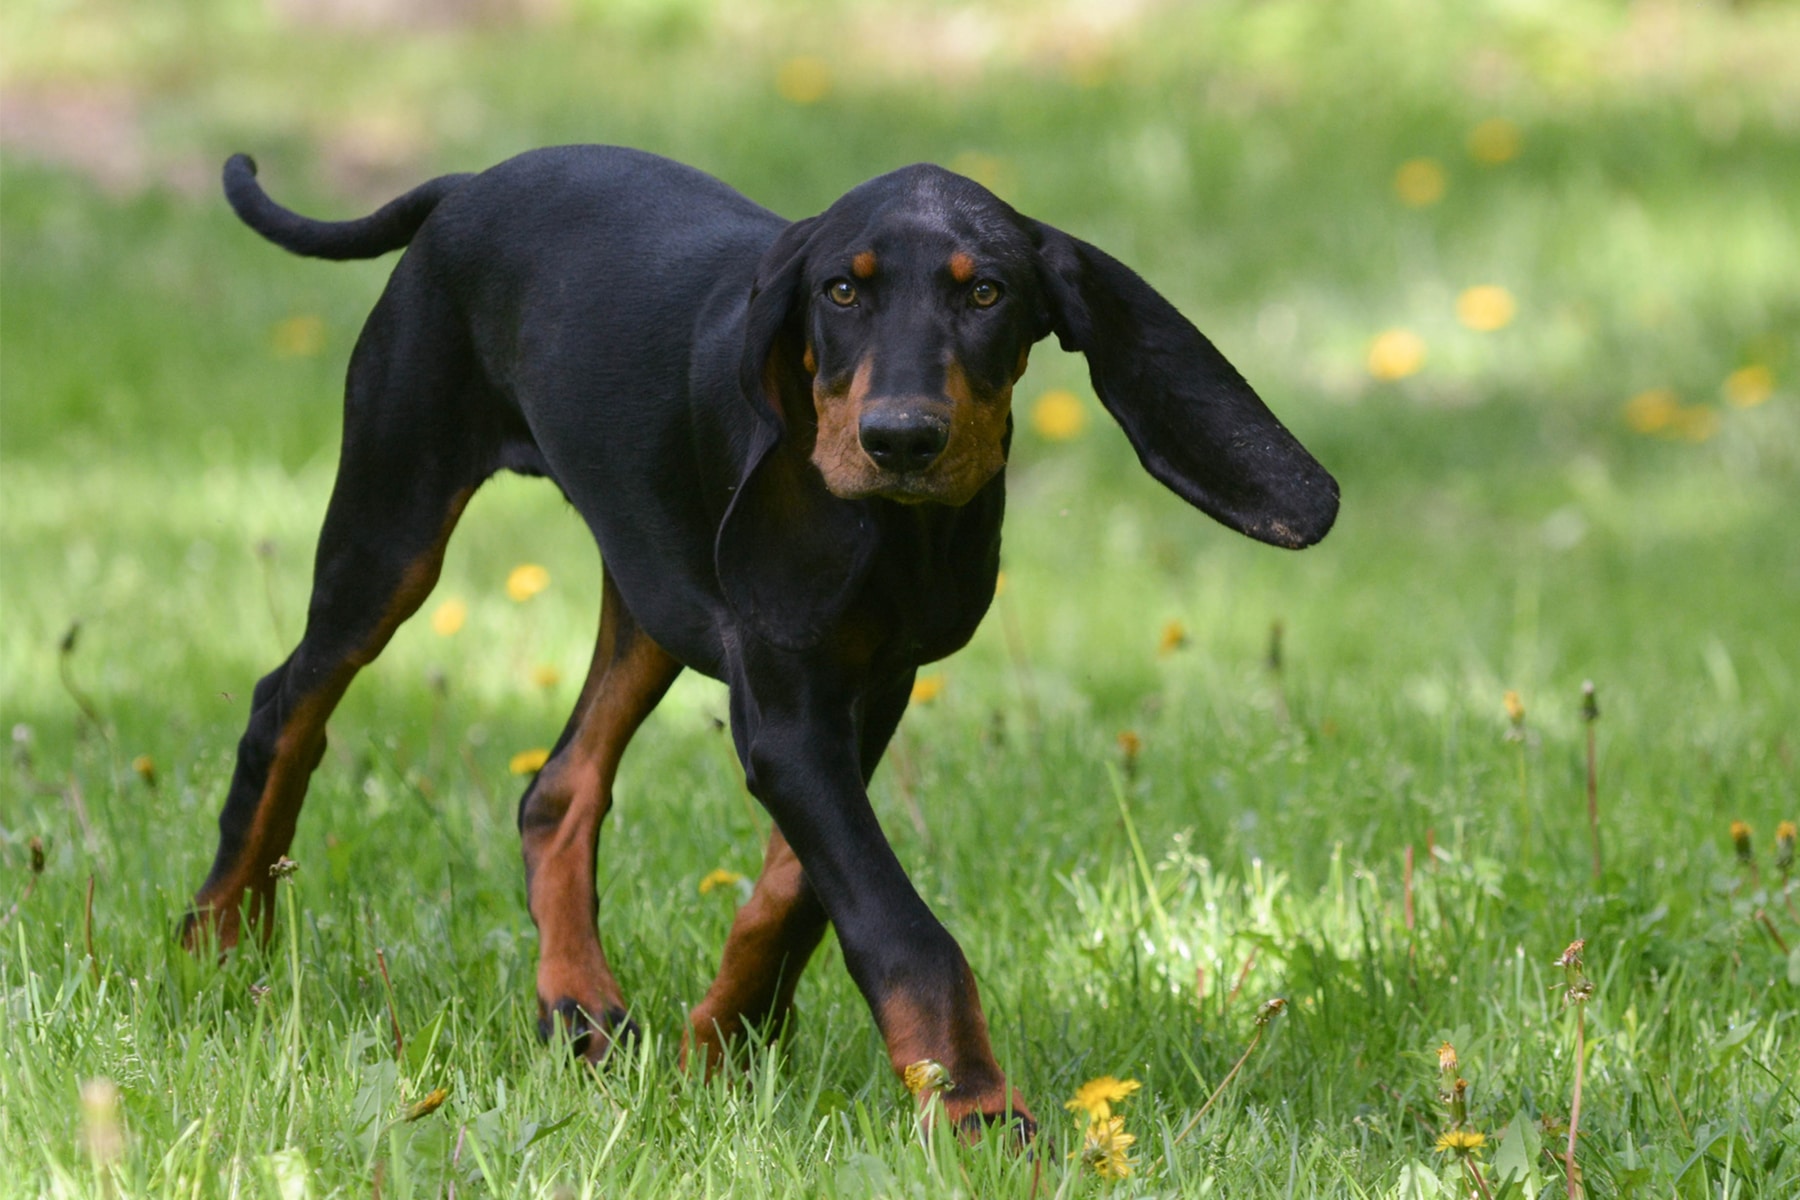 Black And Tan Coonhound Dog Running